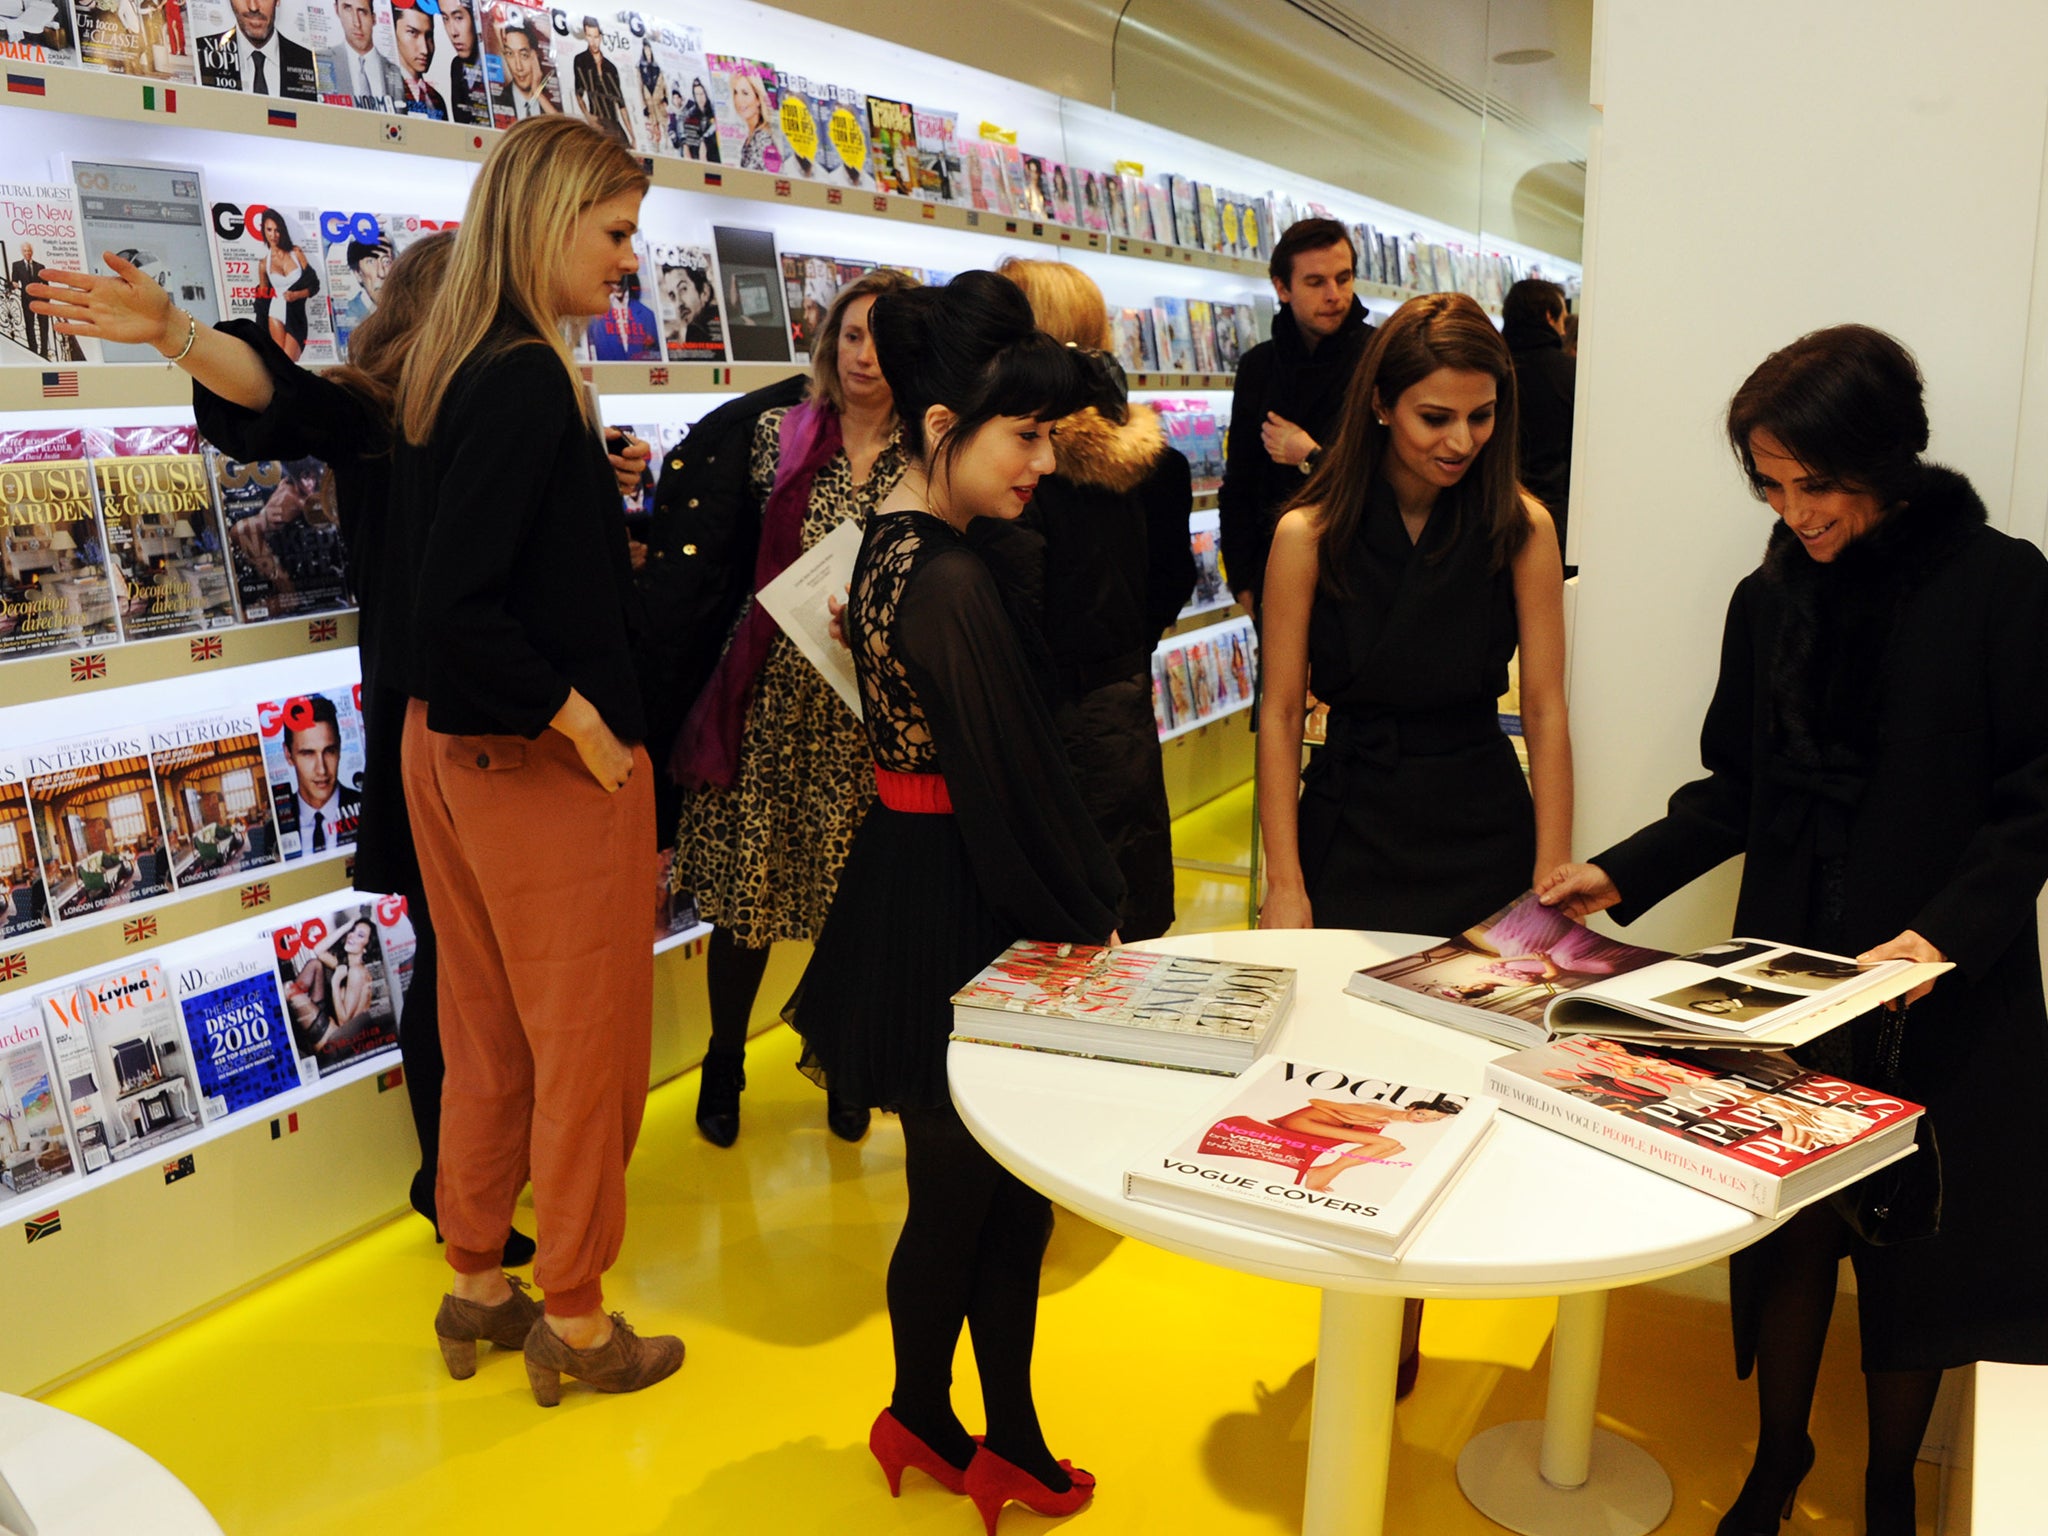 Vogue House employees mingle among the magazines in 2011